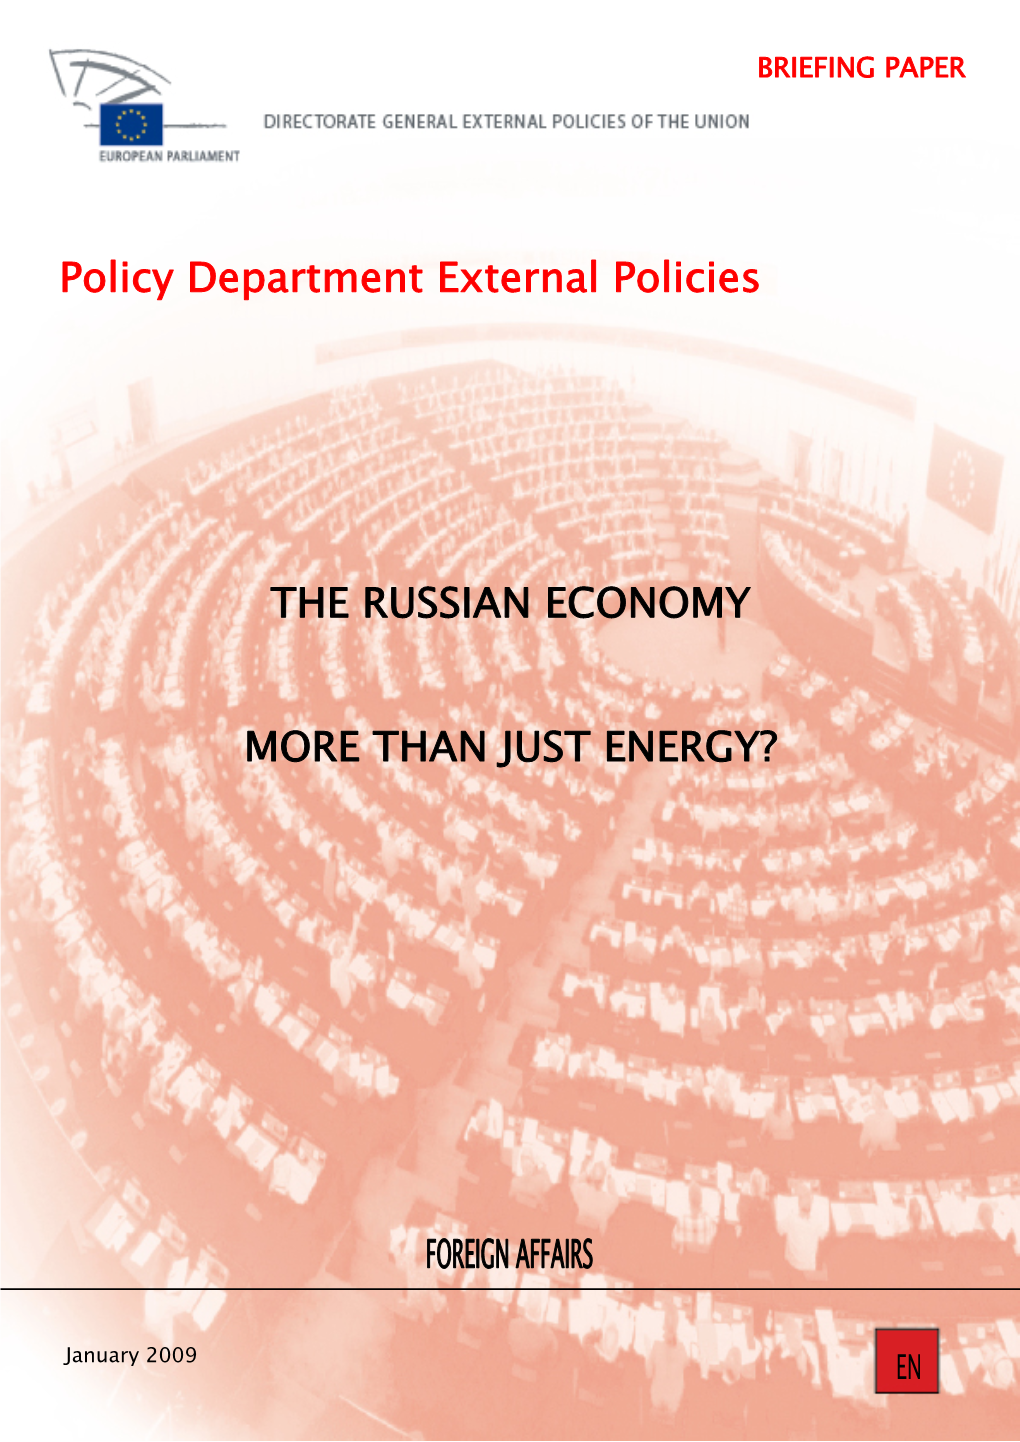 Policy Department External Policies the RUSSIAN ECONOMY MORE